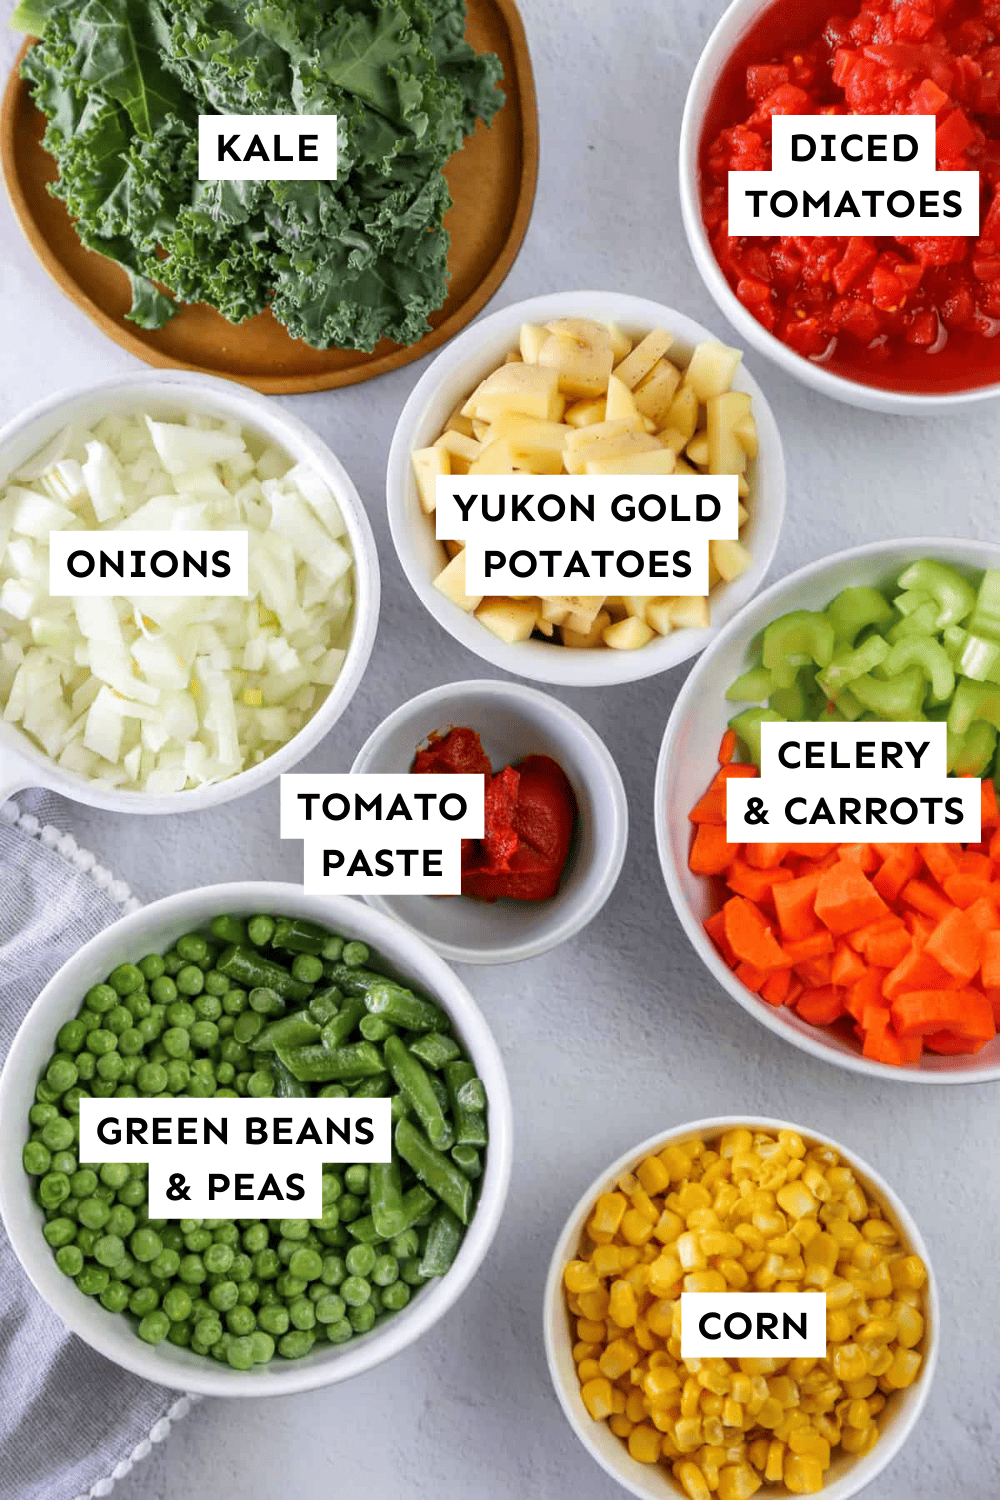 Ingredients for "Eat Your Veggies Soup"  measured out and labeled.